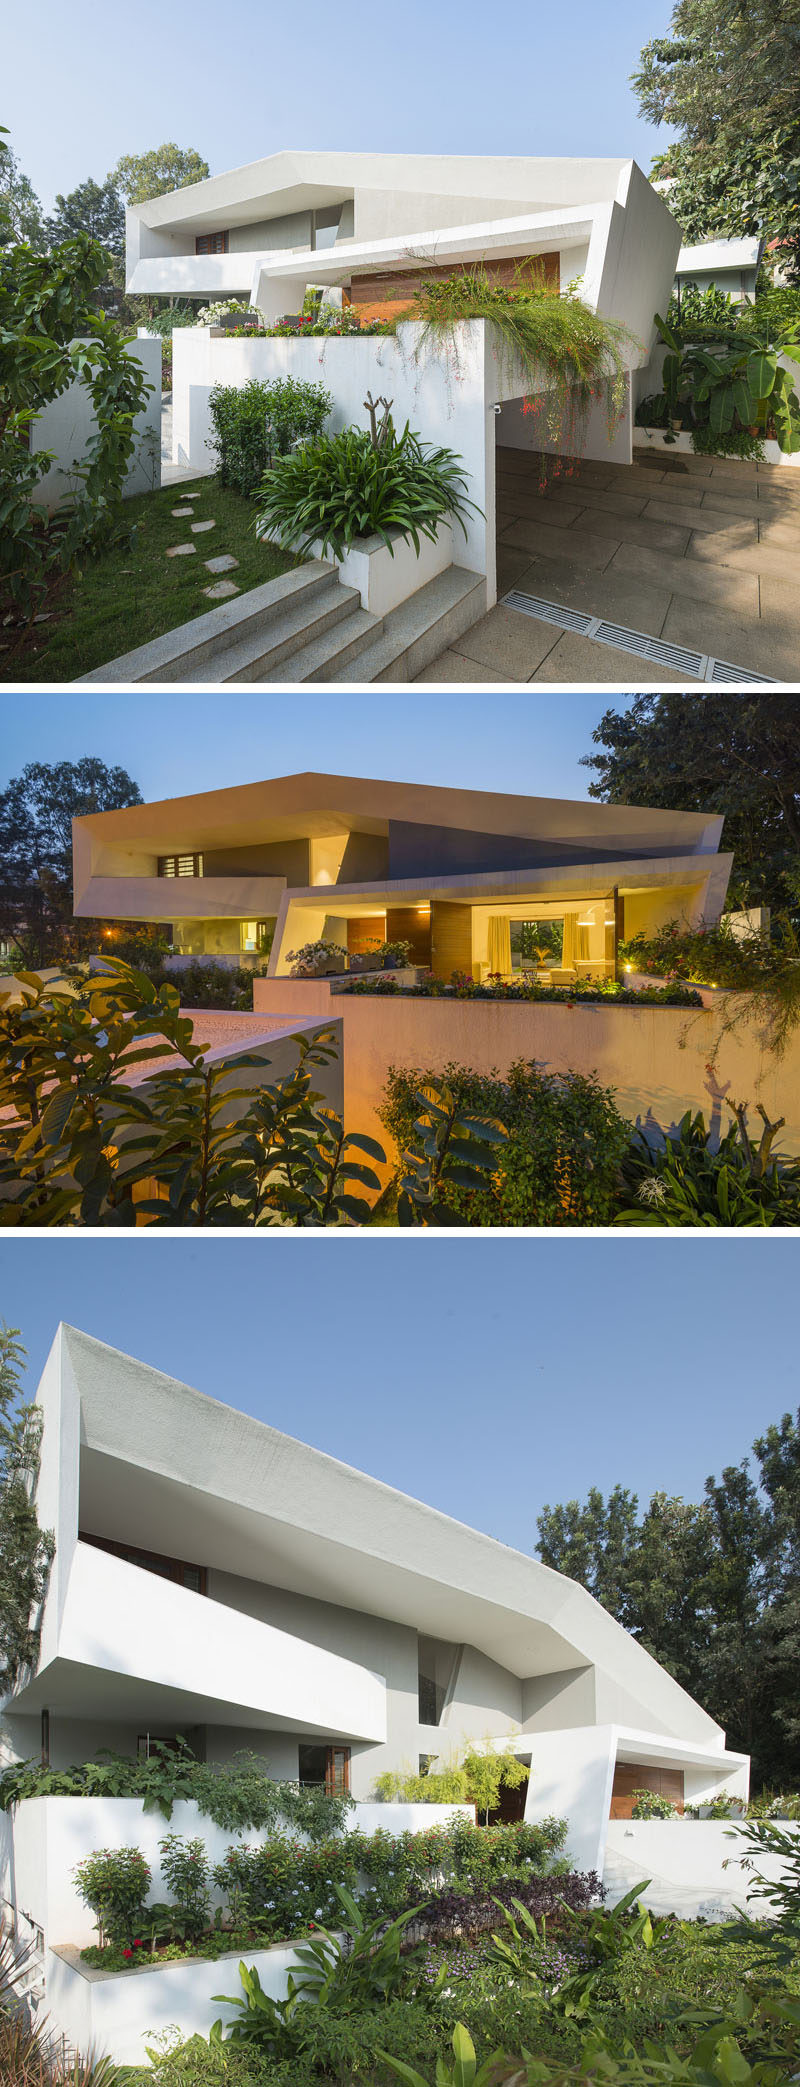 The Design Of This Modern House Features A Very Angular Exterior